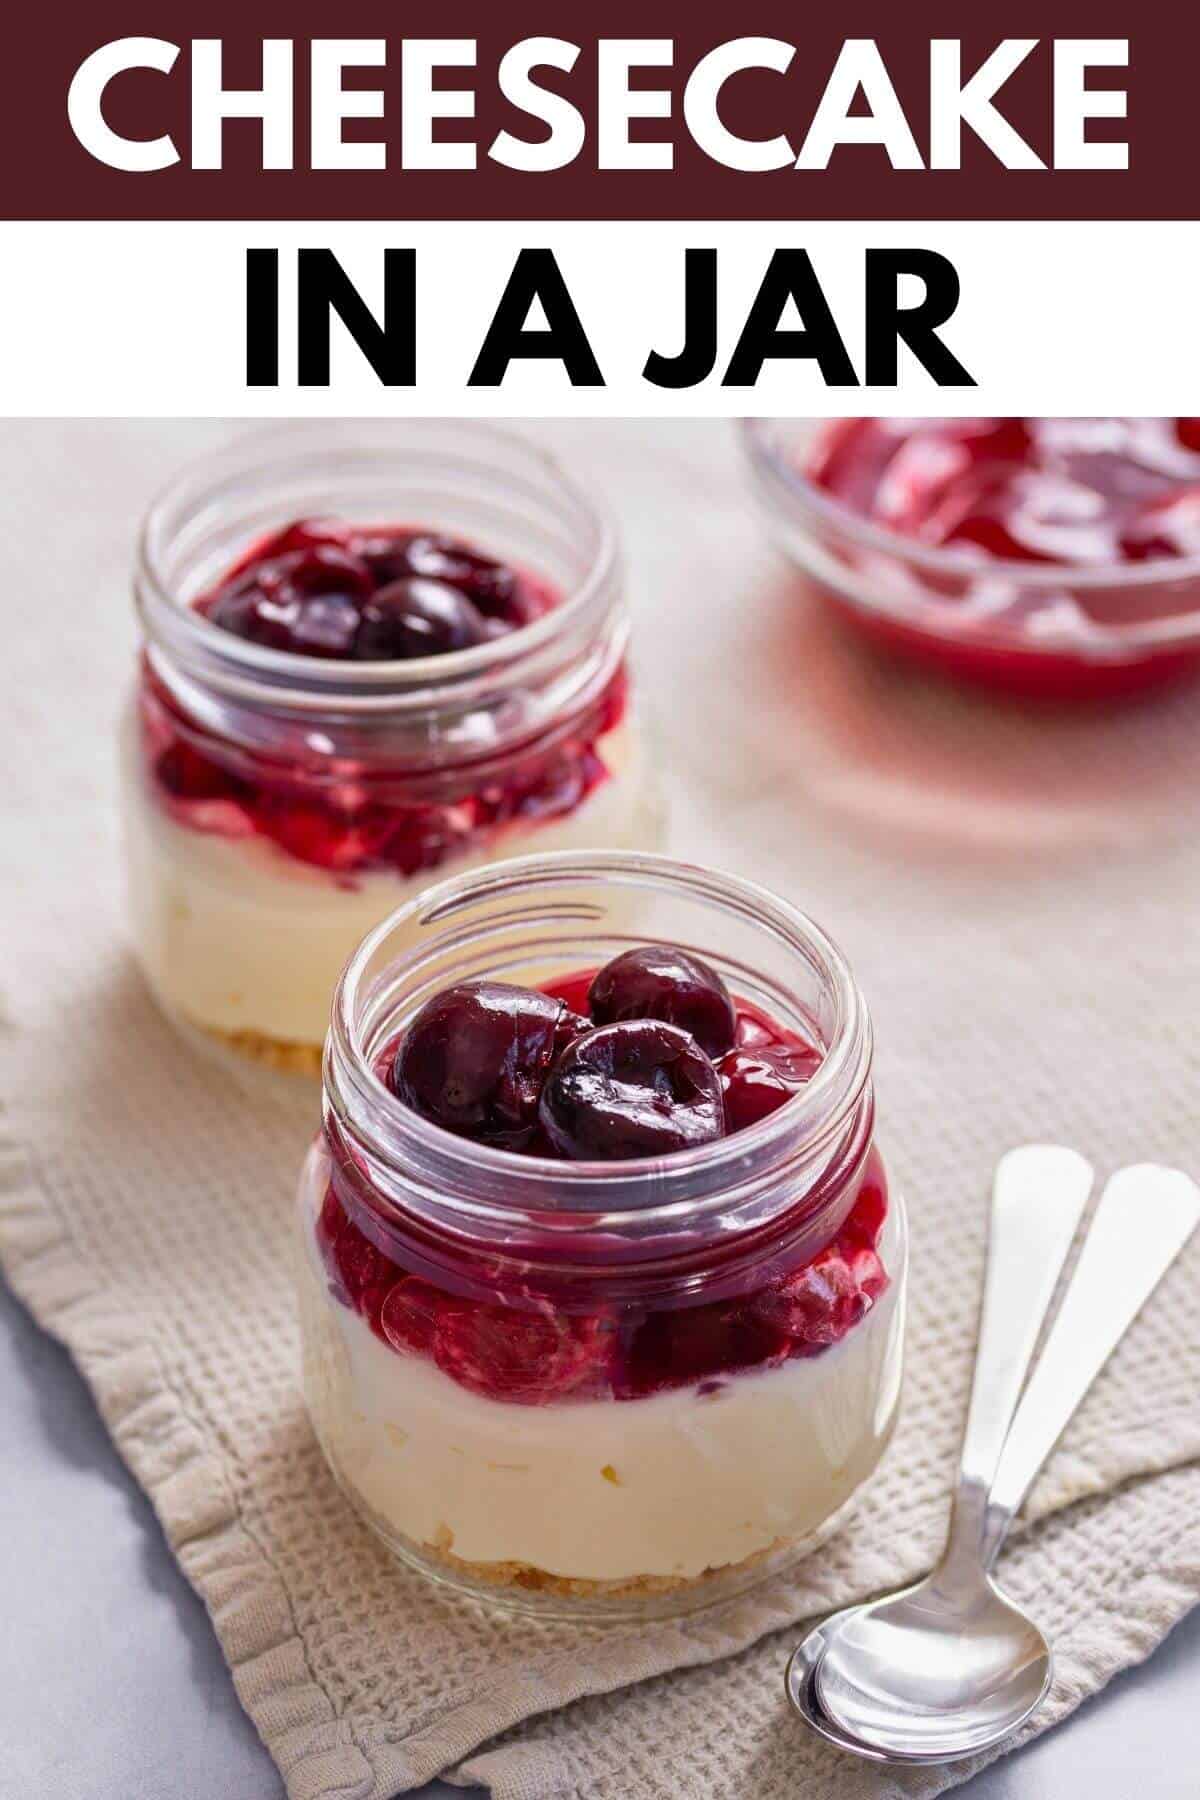 Cheesecake in jars with title text overlay.